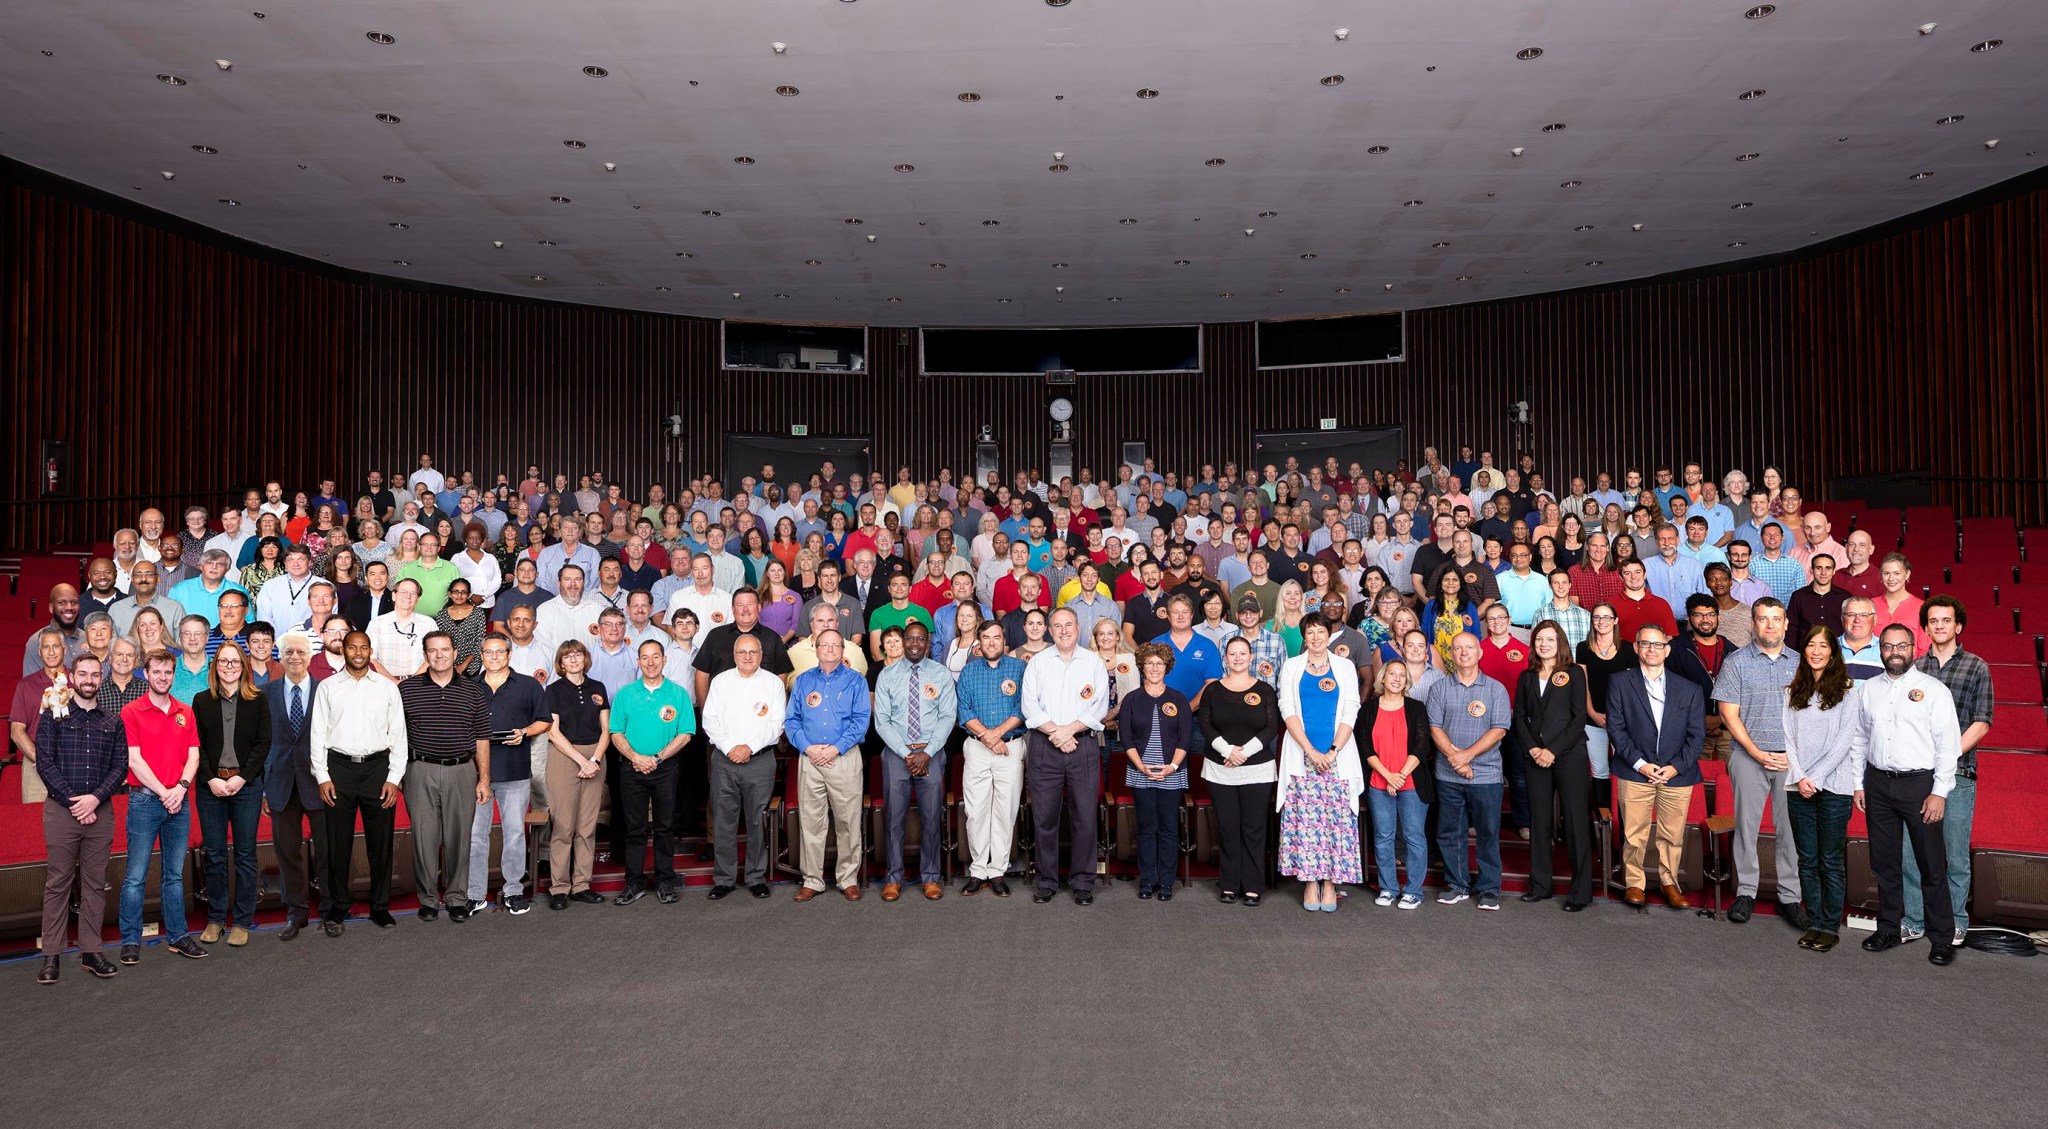 A large group of people pose for a photo inside an auditorium.